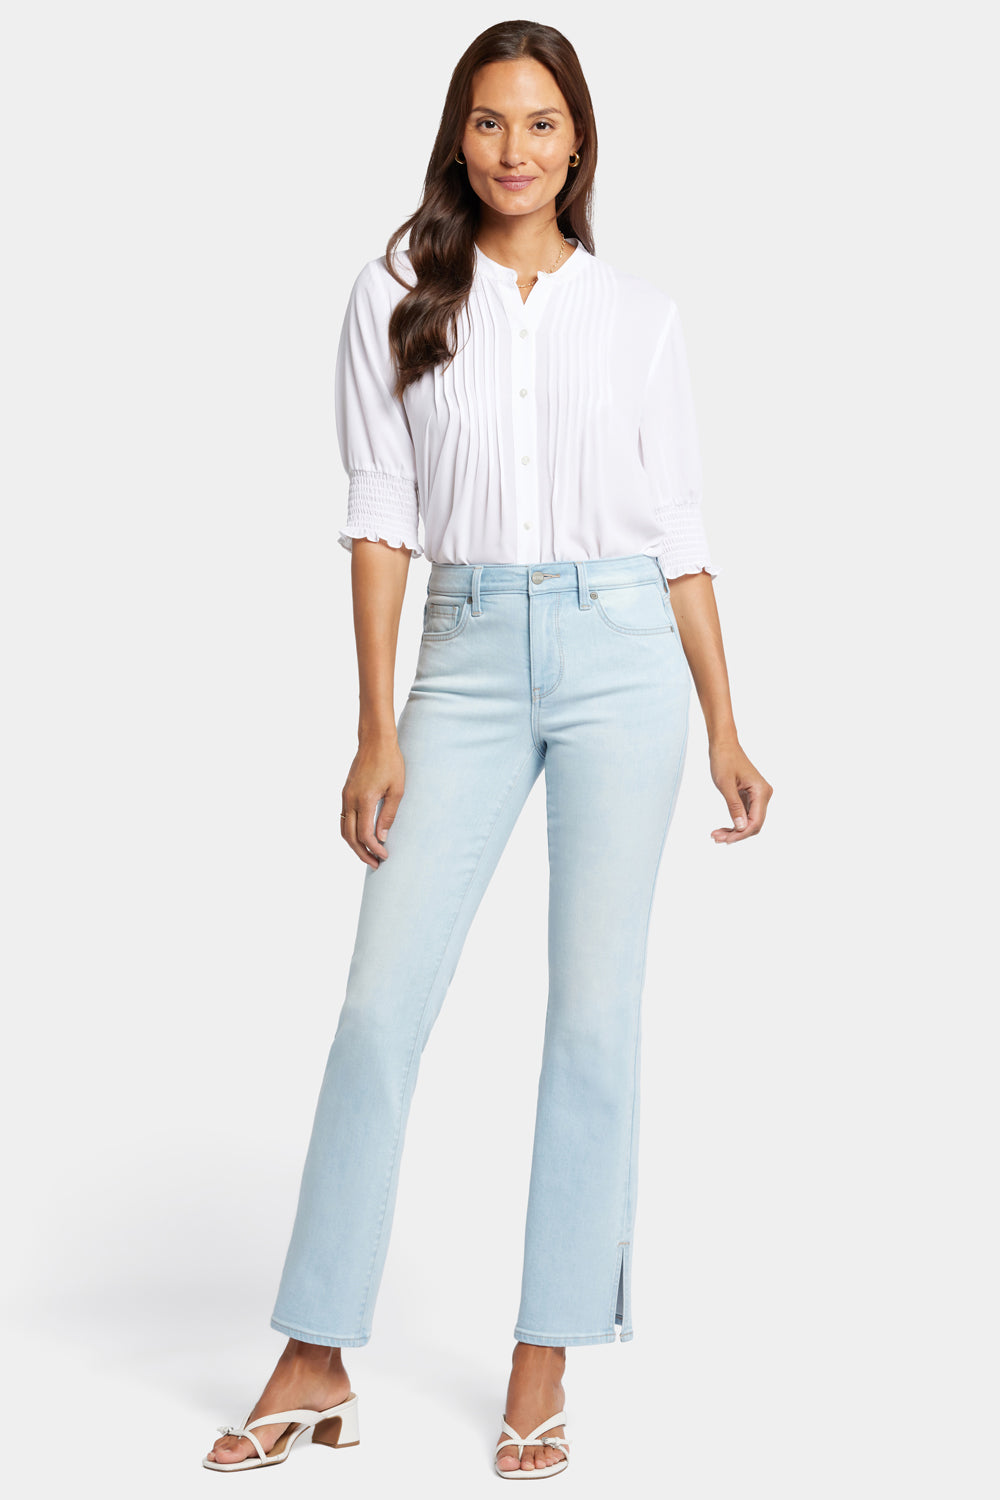 NYDJ Barbara Bootcut Jeans With Side Slits - Oceanfront